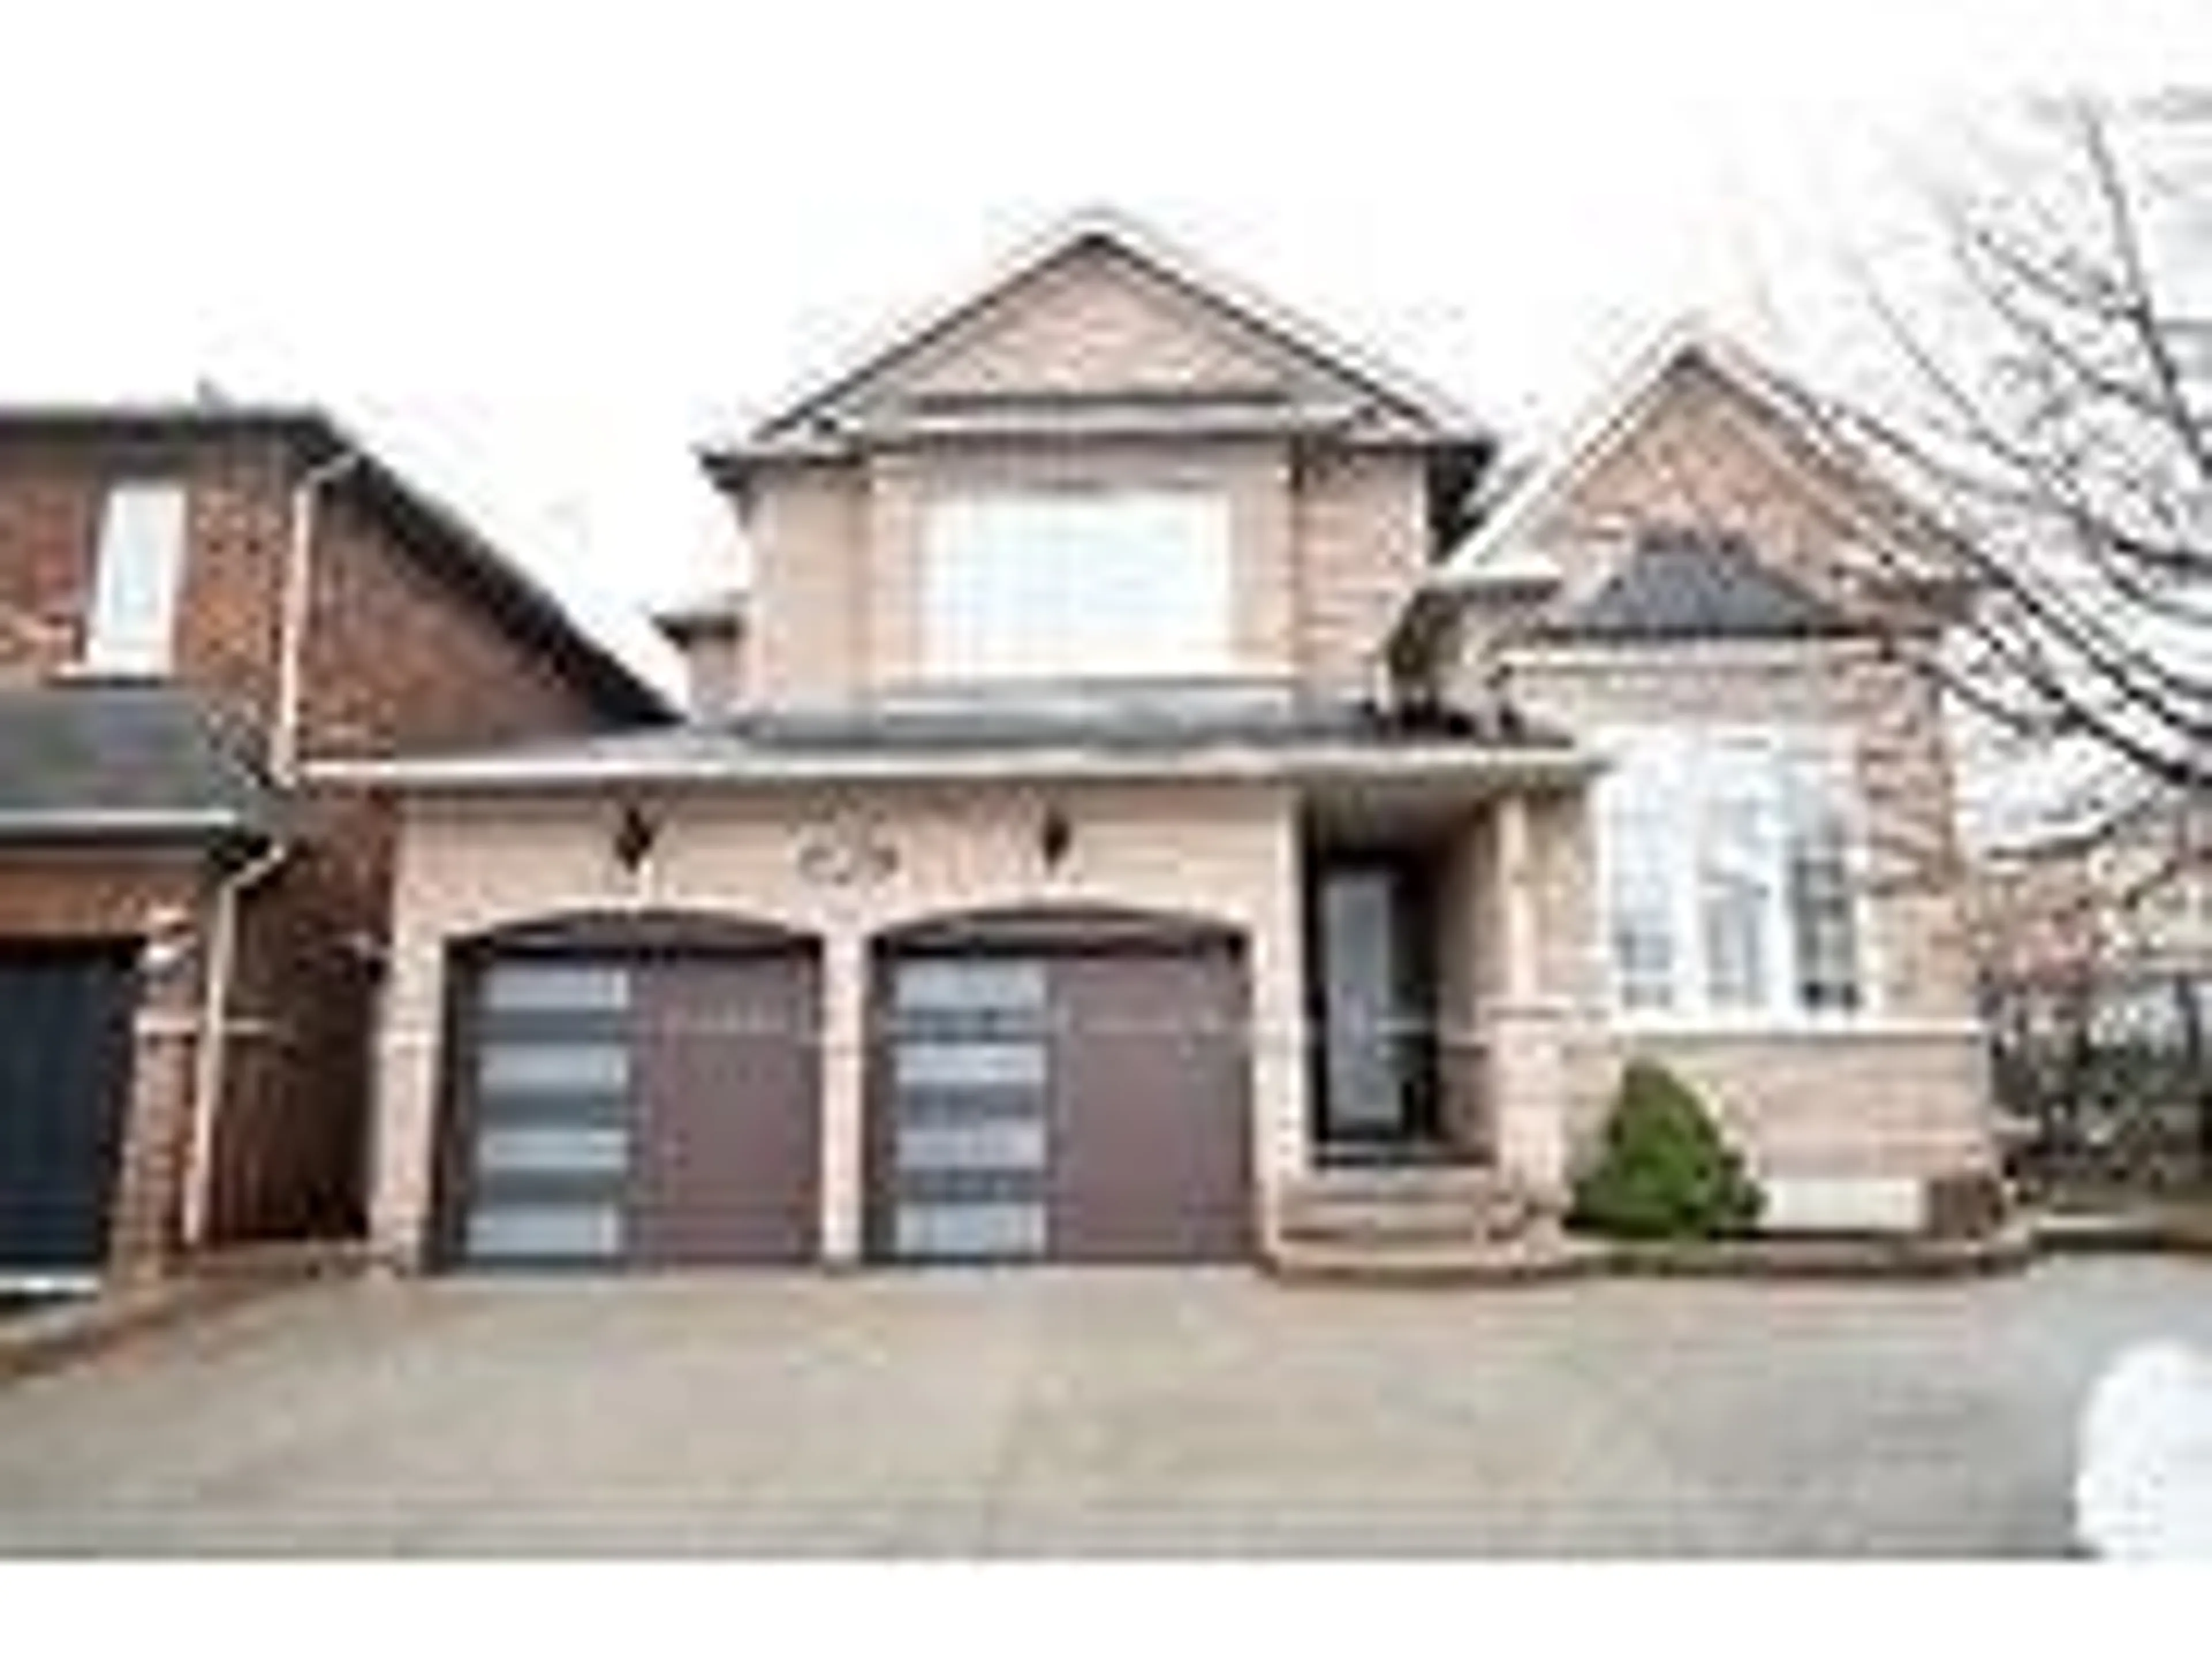 Home with brick exterior material for 225 Father Tobin Rd, Brampton Ontario L6R 0G3